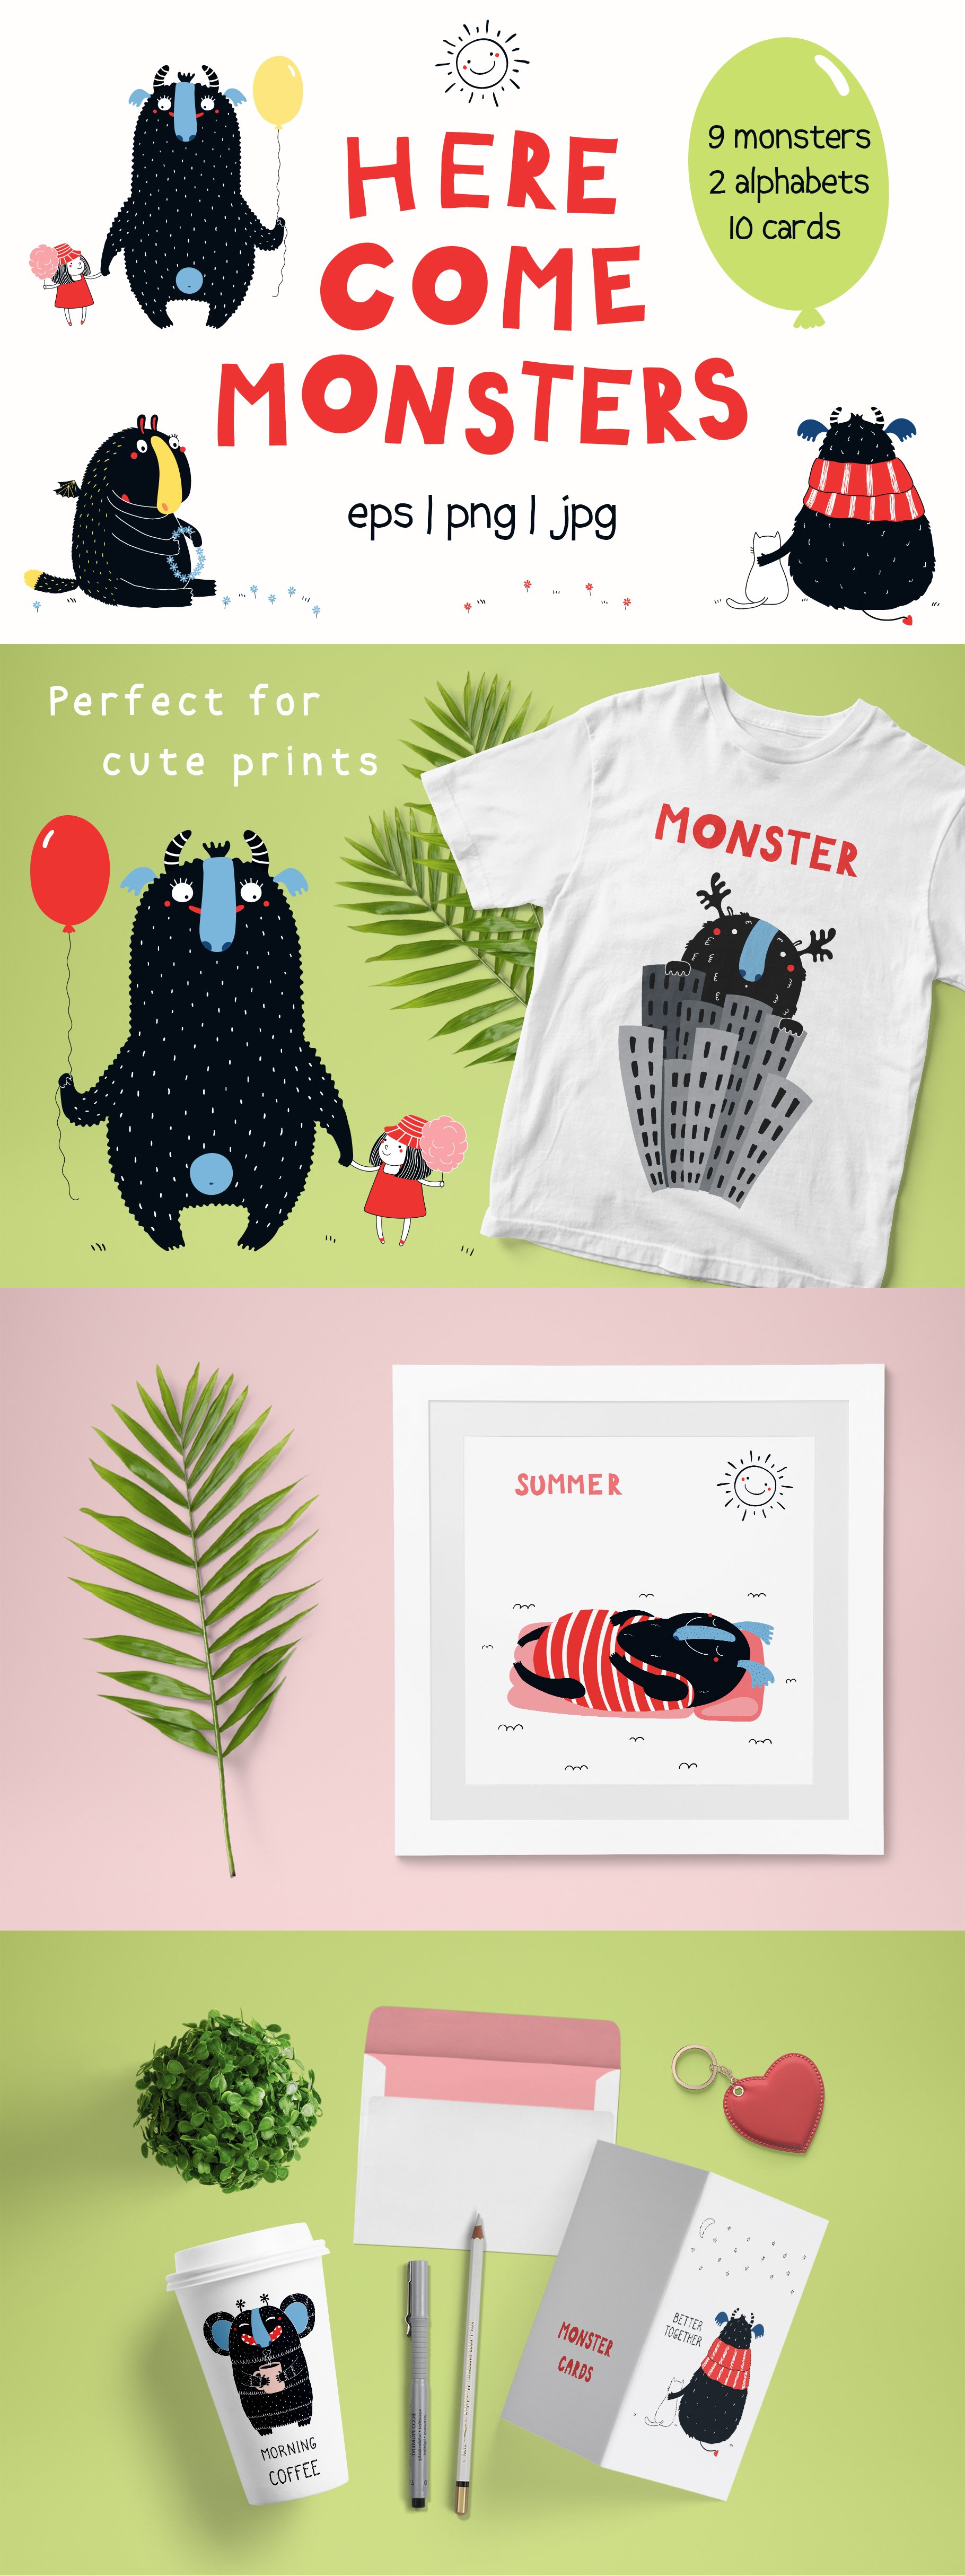 Cute Monsters Kids Vector Graphics cover image.